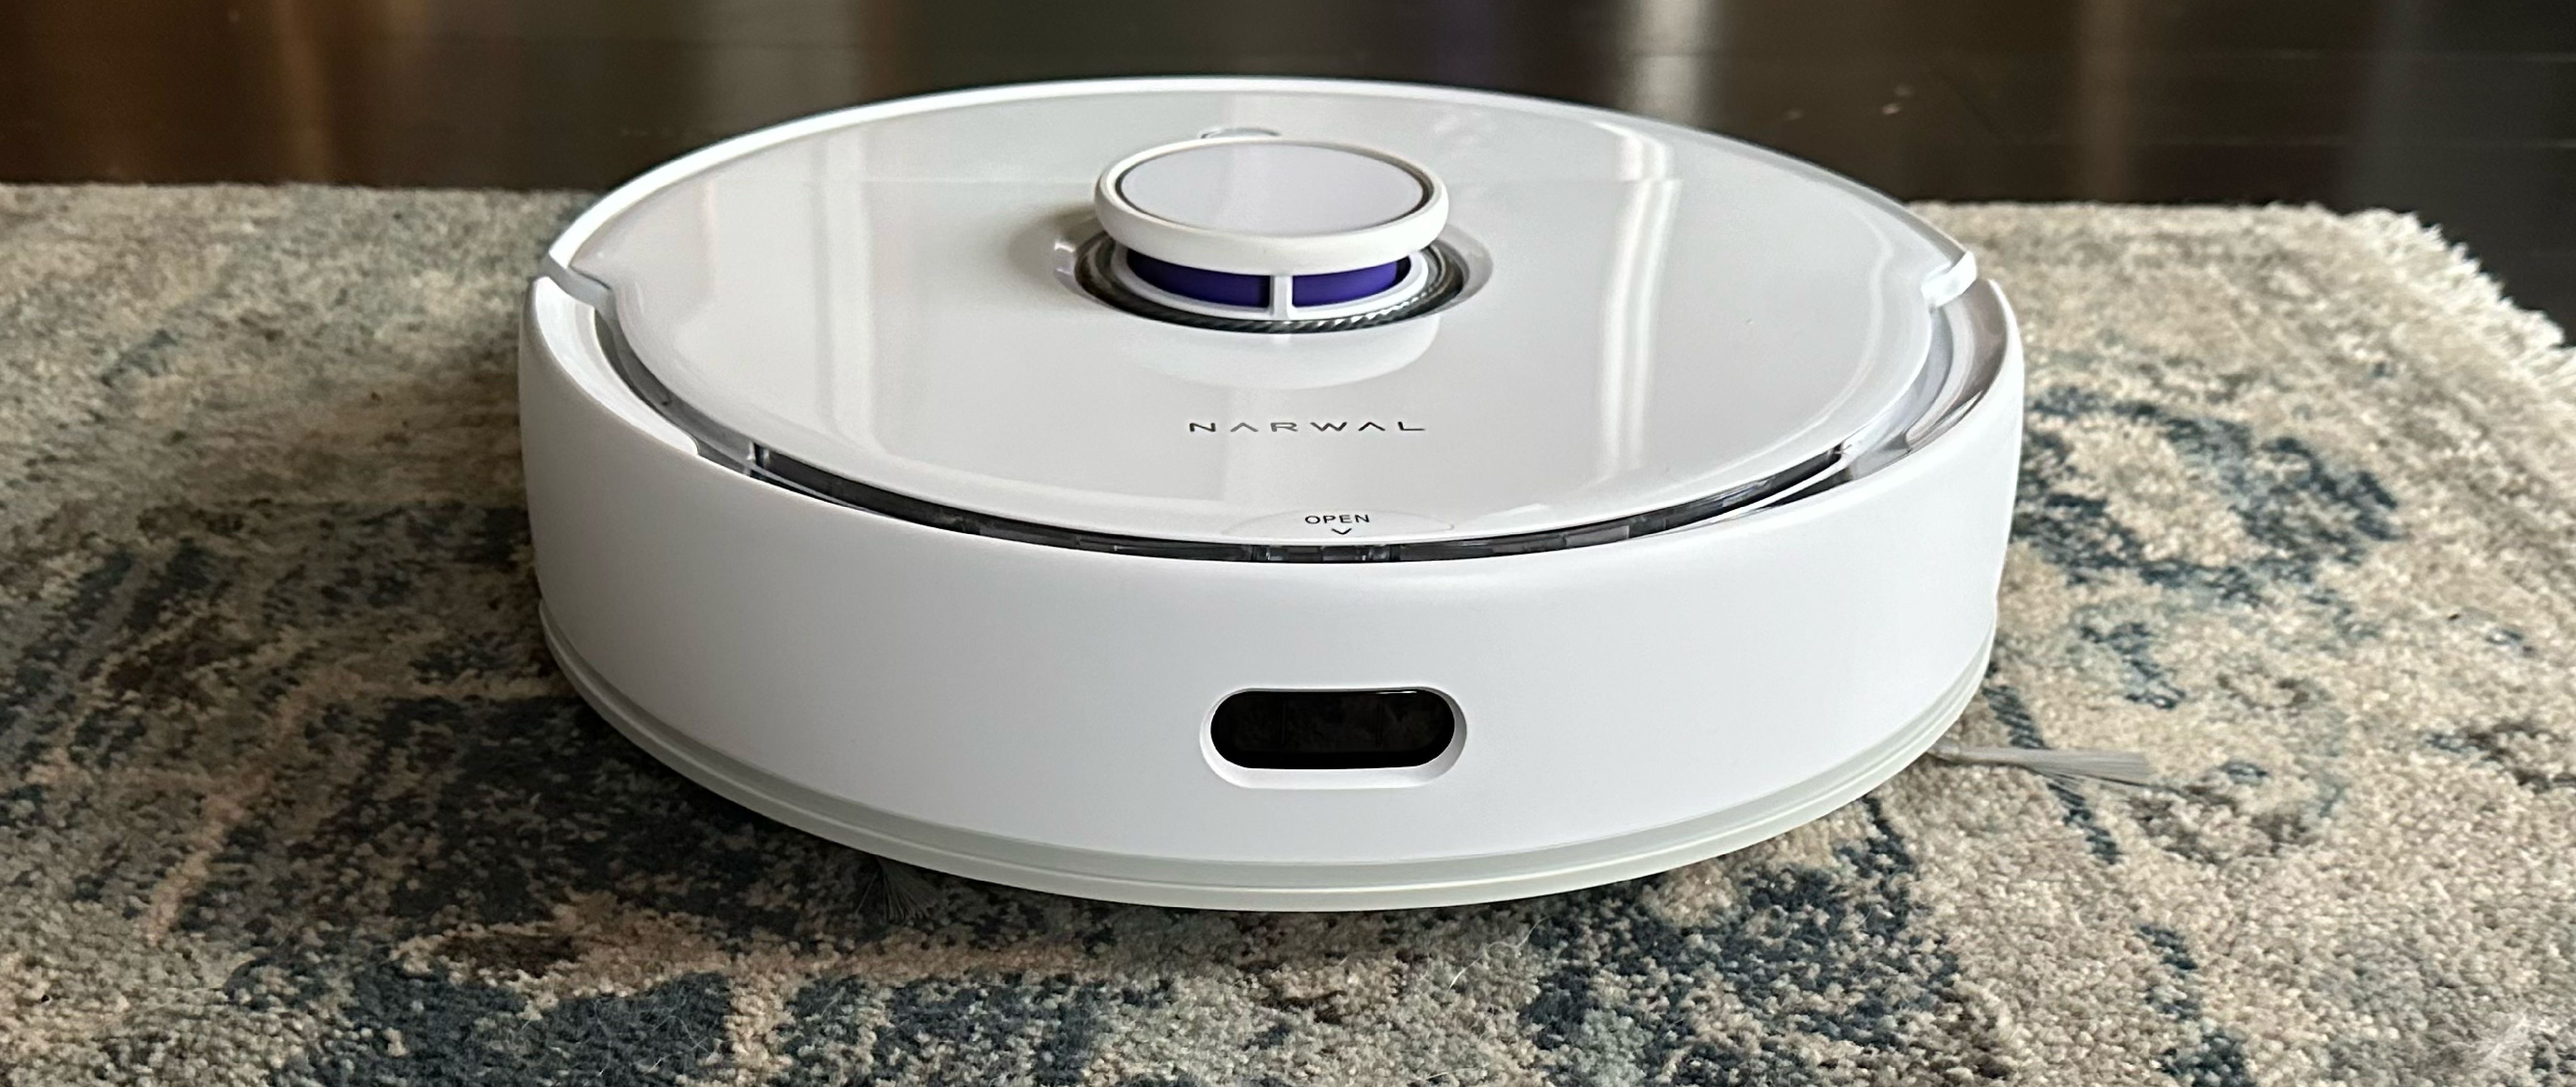 Narwal Freo robot vacuum and mop combo review